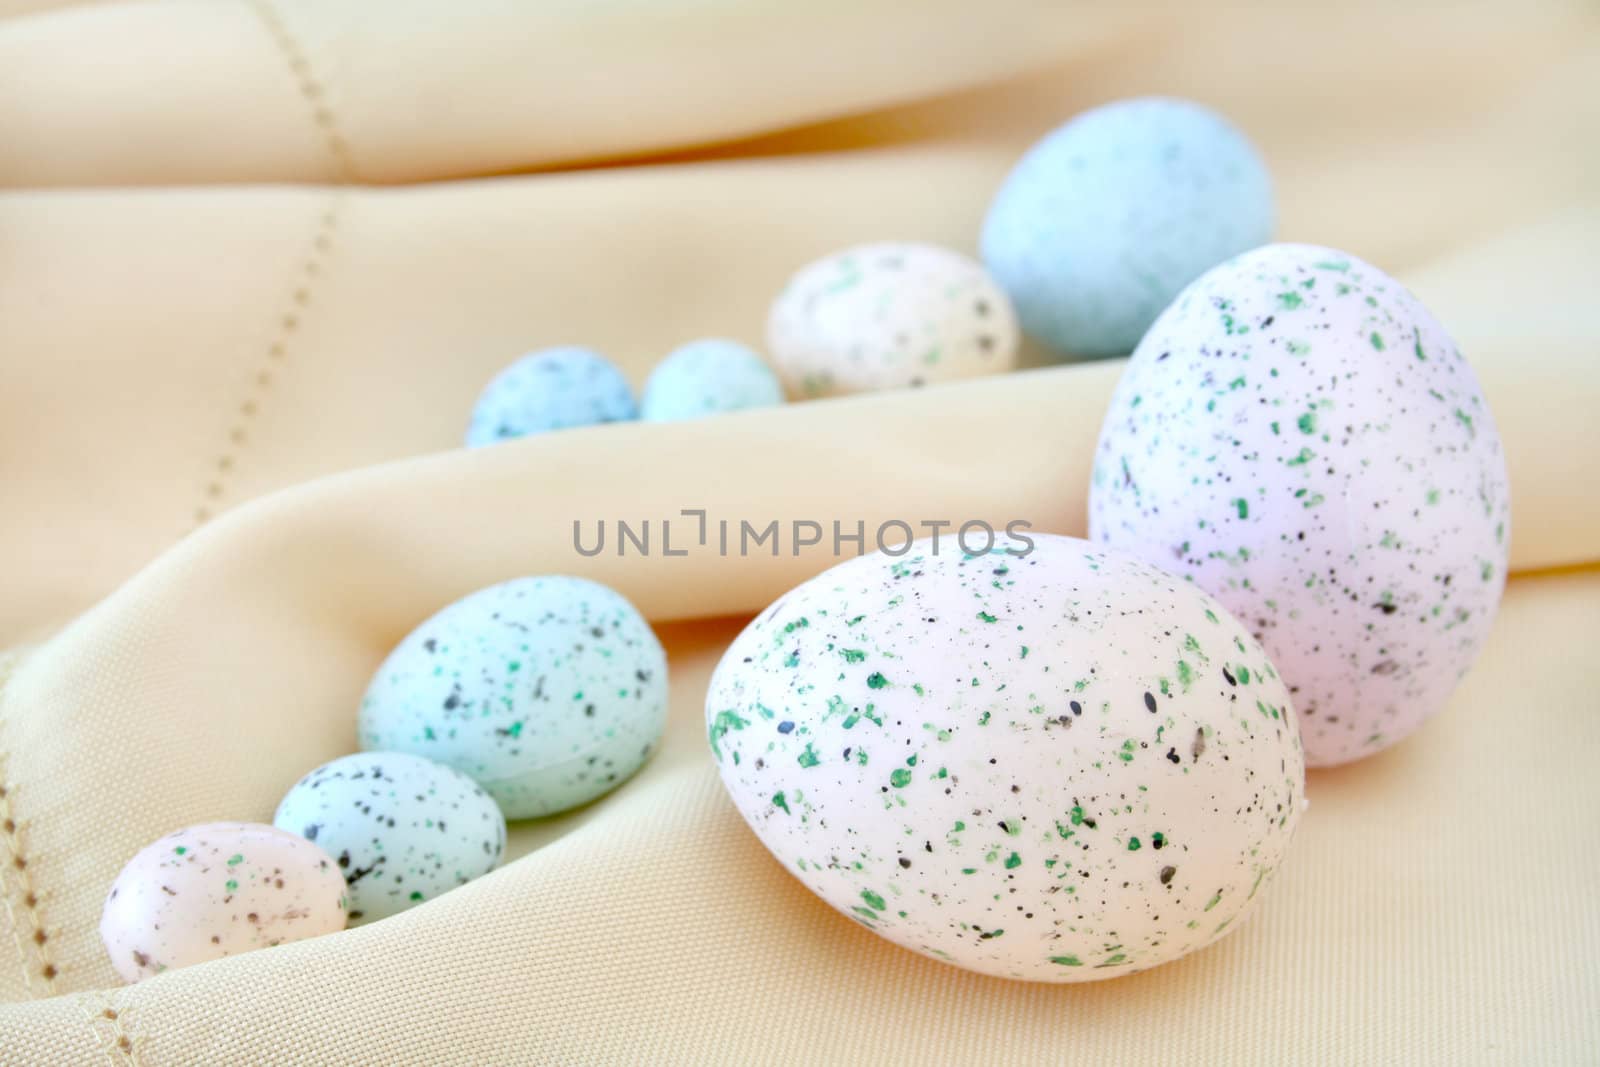 Colorful Easter eggs on a cloth background.